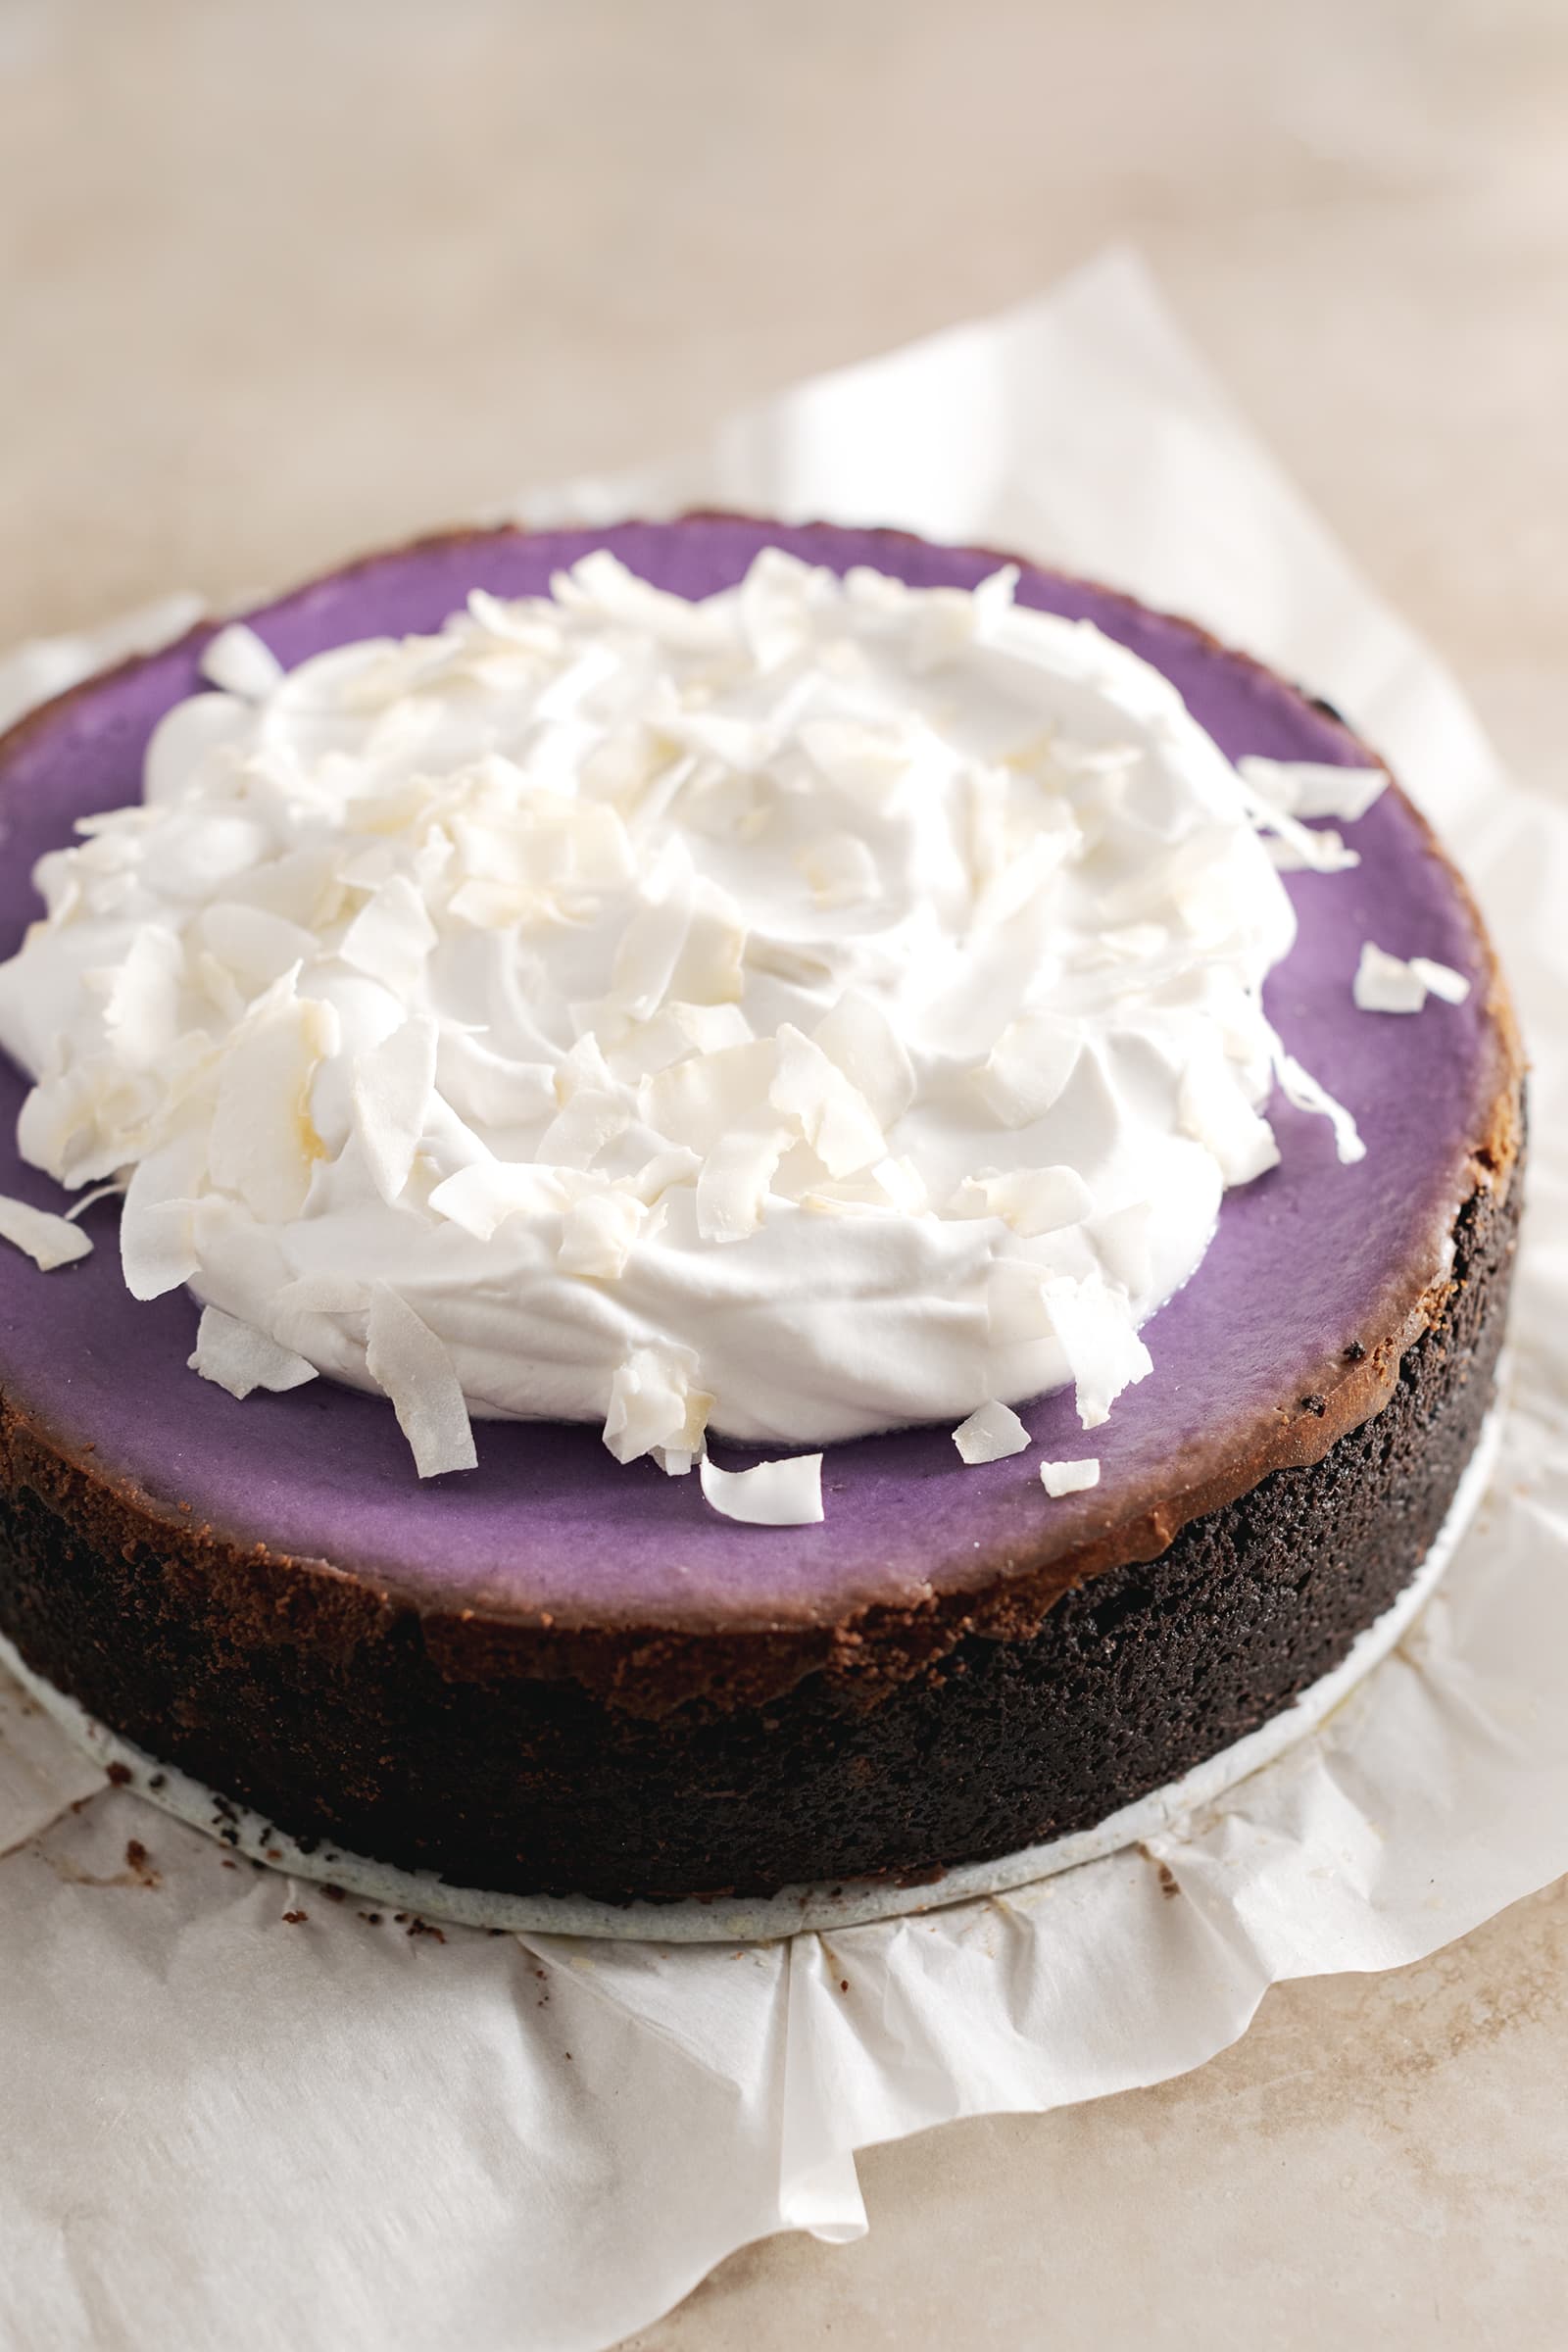 Purple yam cheesecake with dollops of coconut cream spread on top.